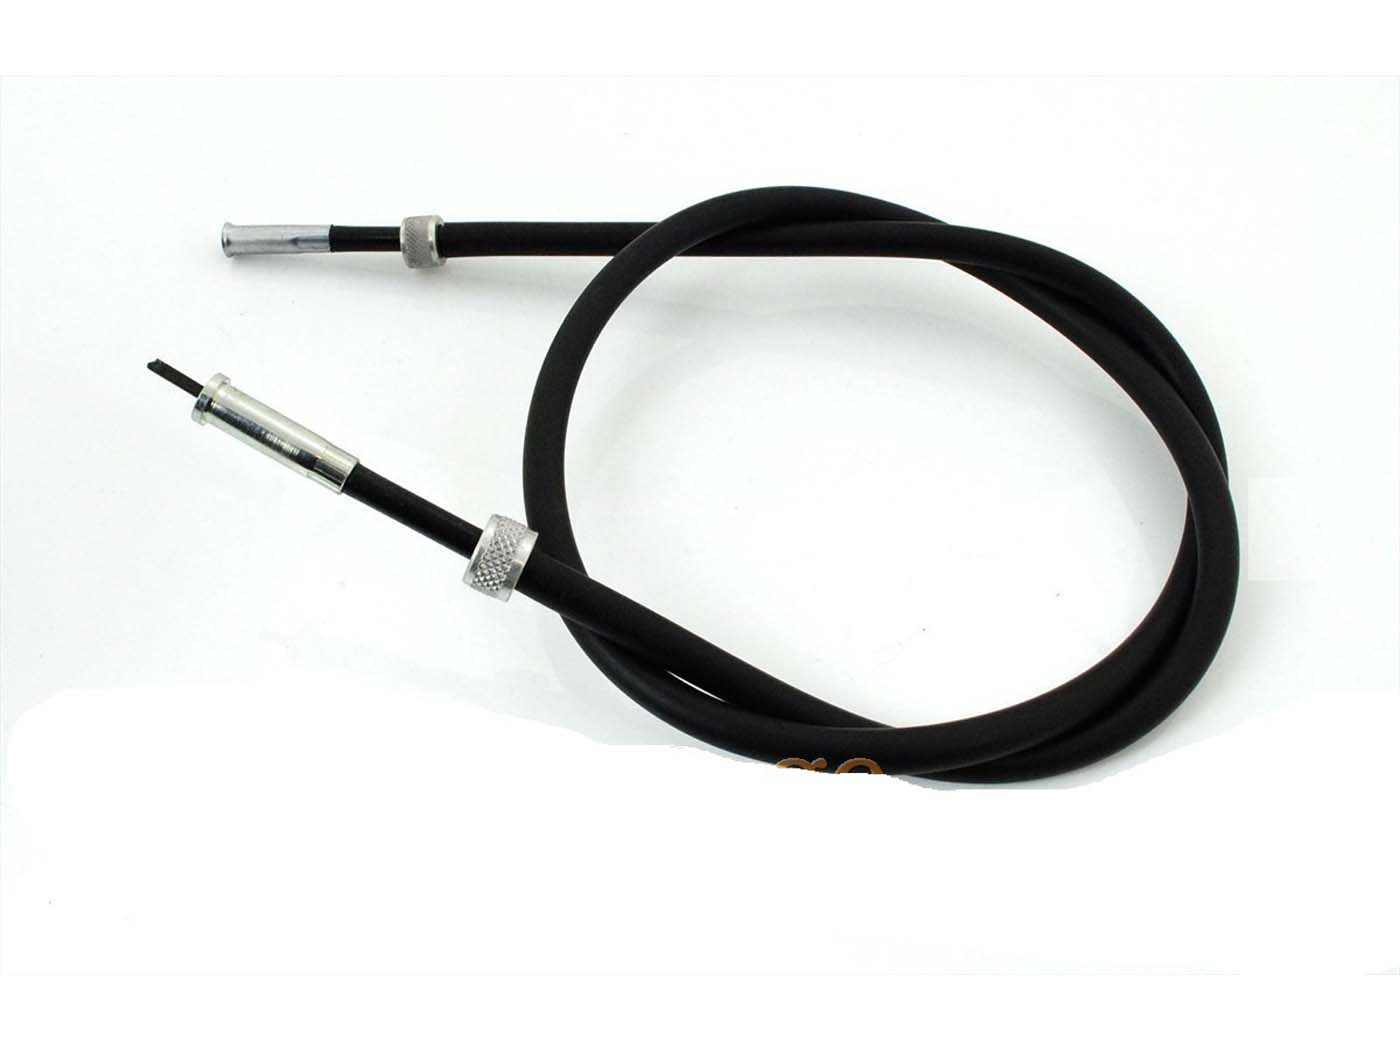 Speedometer Cable 900mm For Rieju Drac 50 - 125 Ccm Moped Mokick